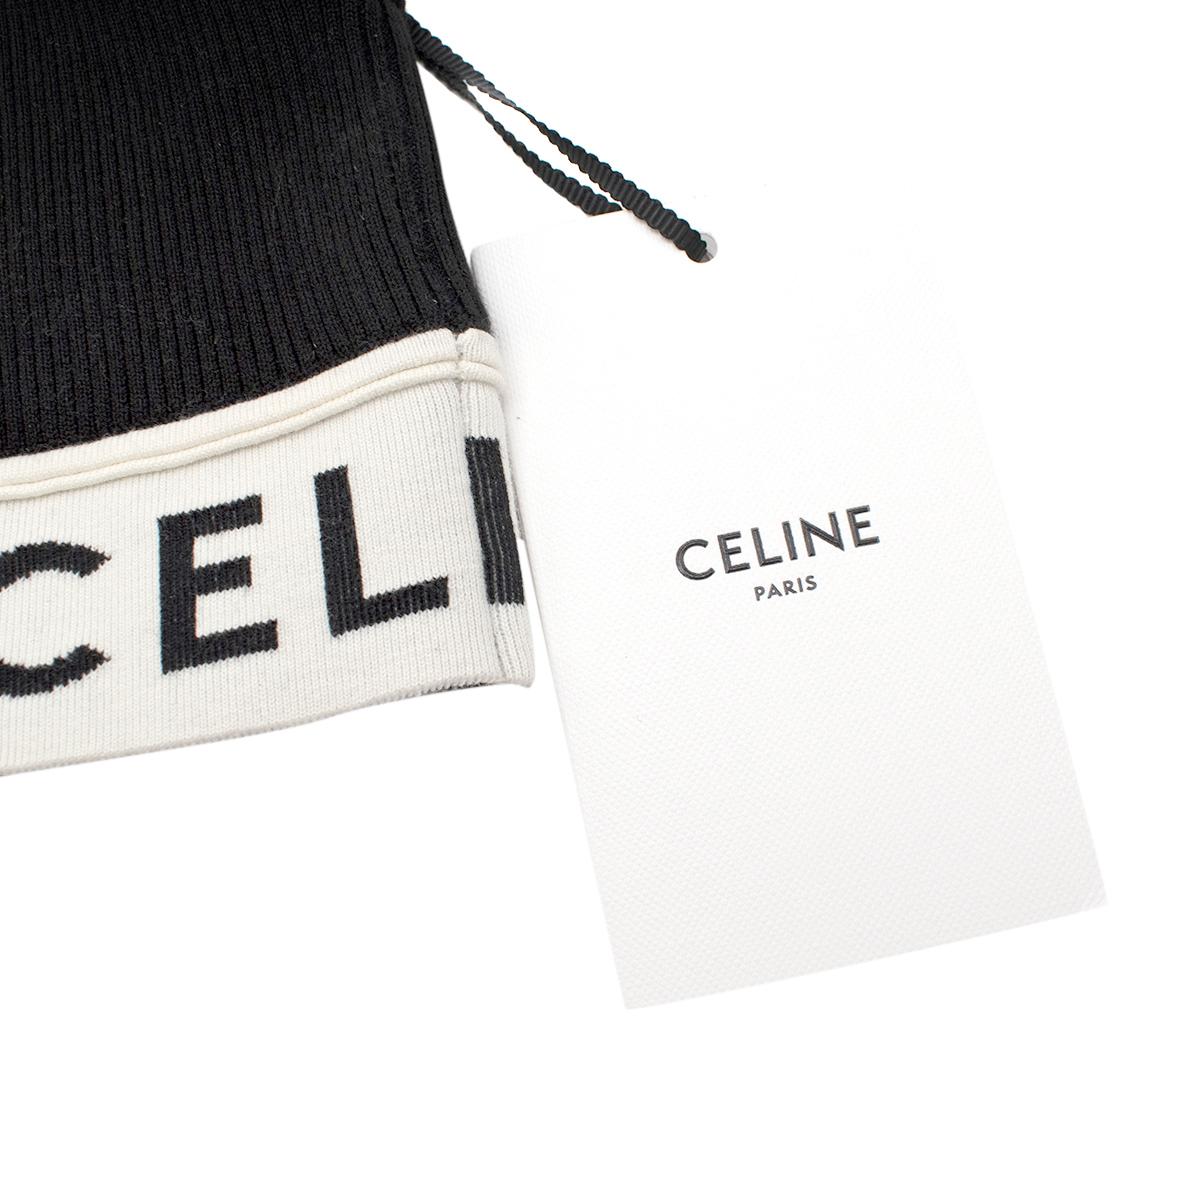 Celine Black Sports Bra In Athletic Knit

Fitted ribbed knit
Crew Neck
Black & Cream Colourway
CELINE logo band
Brand new with tags

Material: 
77% cotton, 21% nylon, 2% elastane

Made in Italy 

Length: 35cm
Chest: 33.5cm